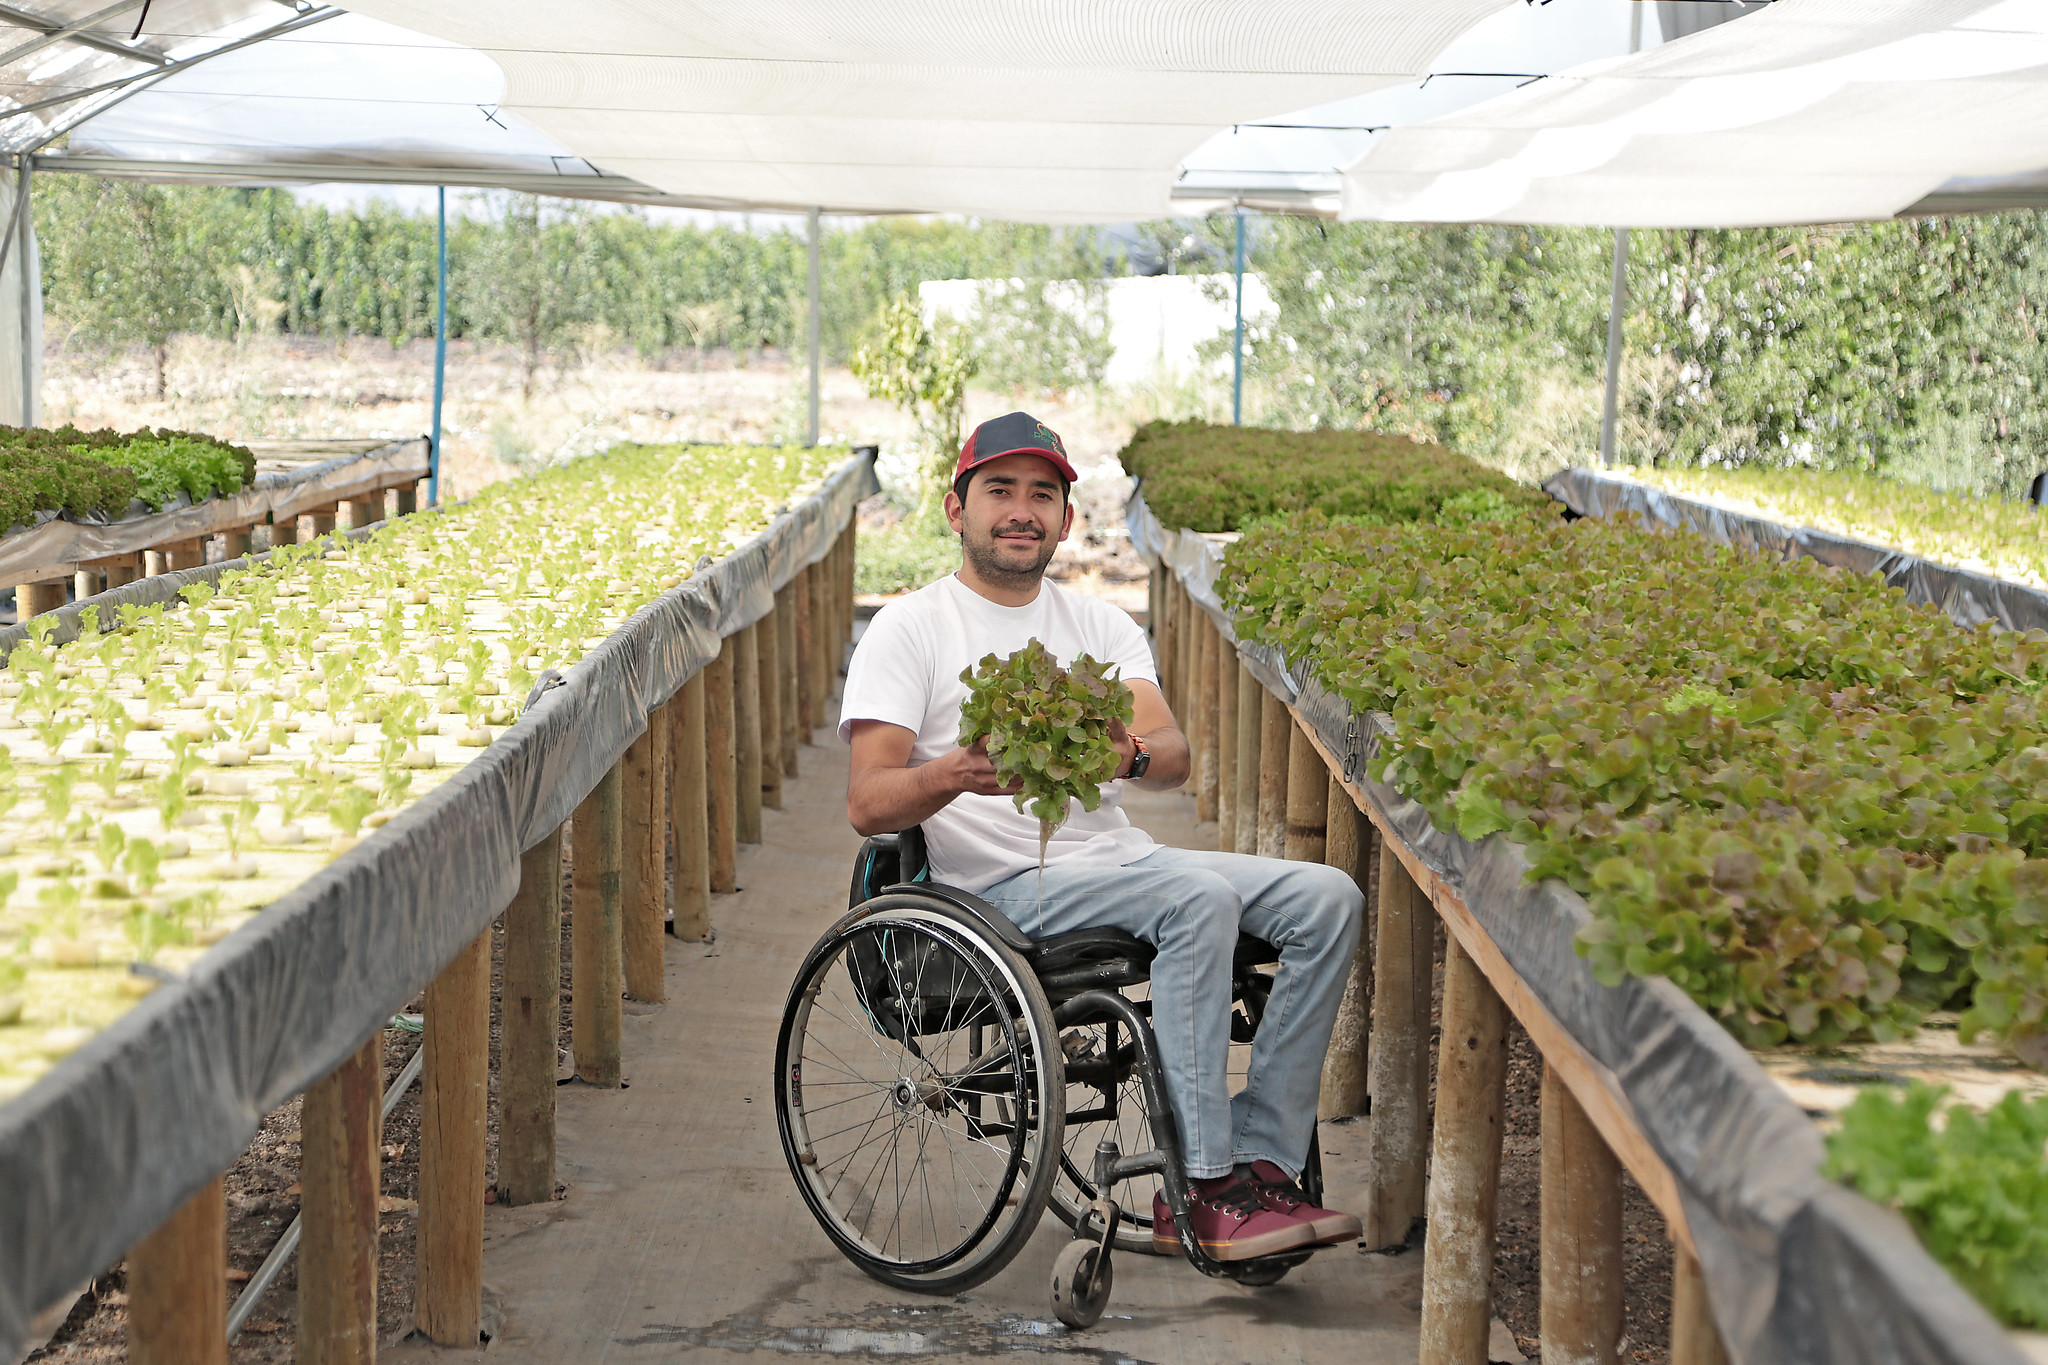 Man in wheel chair showing a lettuce from trays of others in lettuce nursery